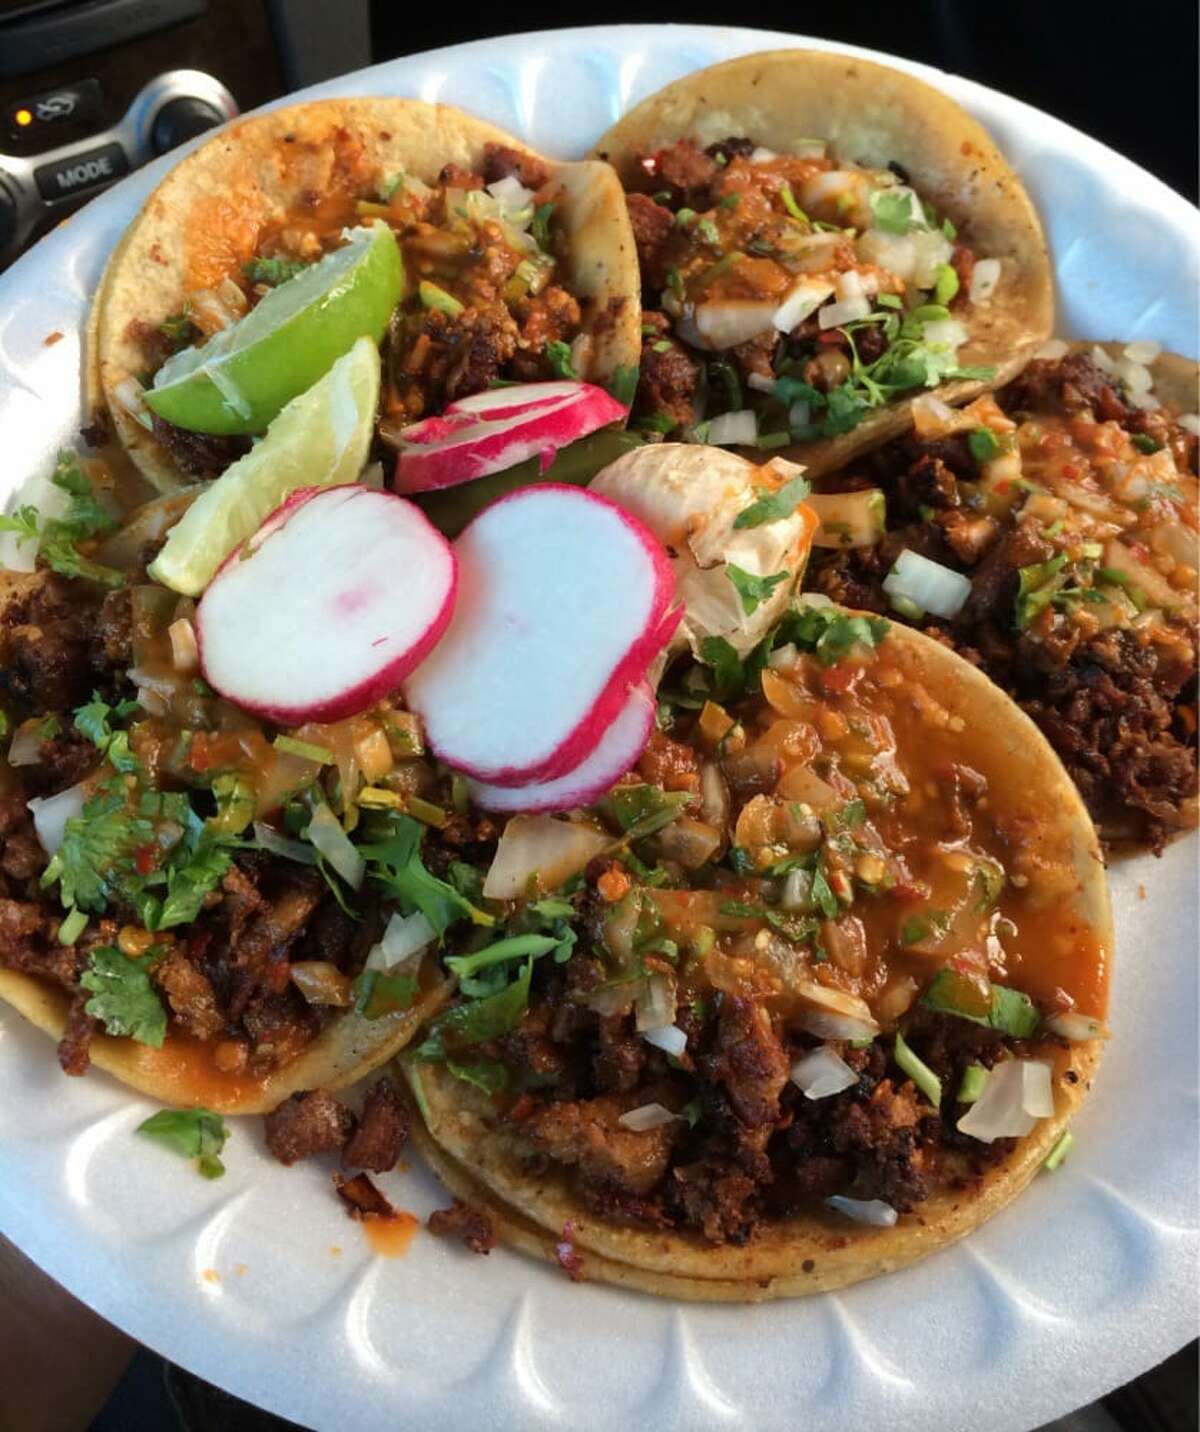 Tacos al pastor with the requisite sliced radish and limes at Oakland food truck, Tacos El Gordo.